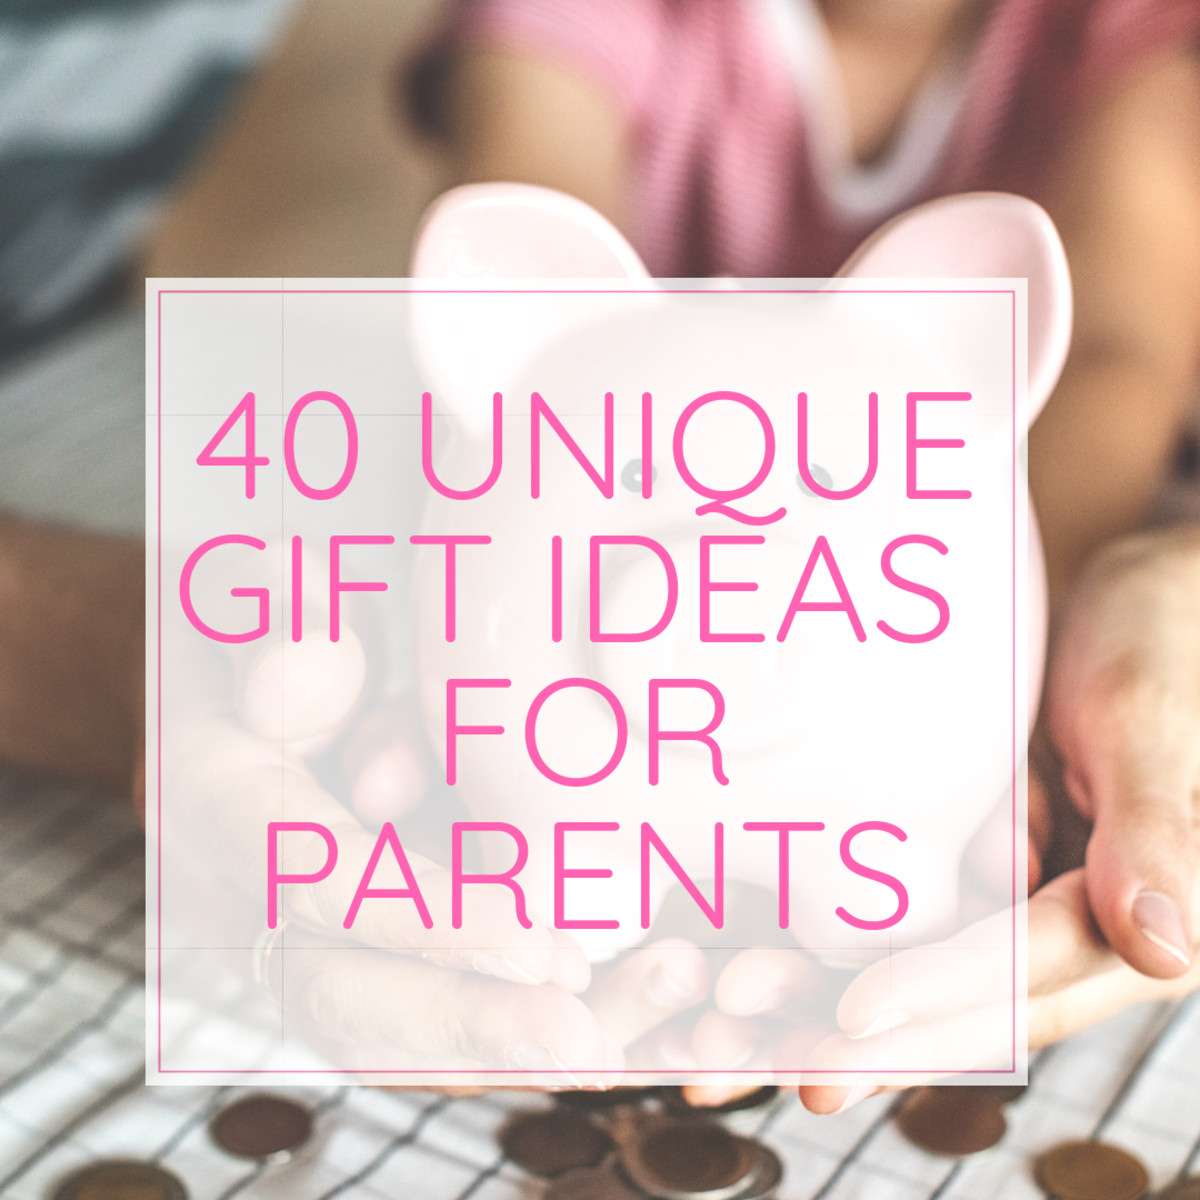 Gift Ideas For Elderly Couple
 Original Gift Ideas for Seniors Who Don’t Want Anything